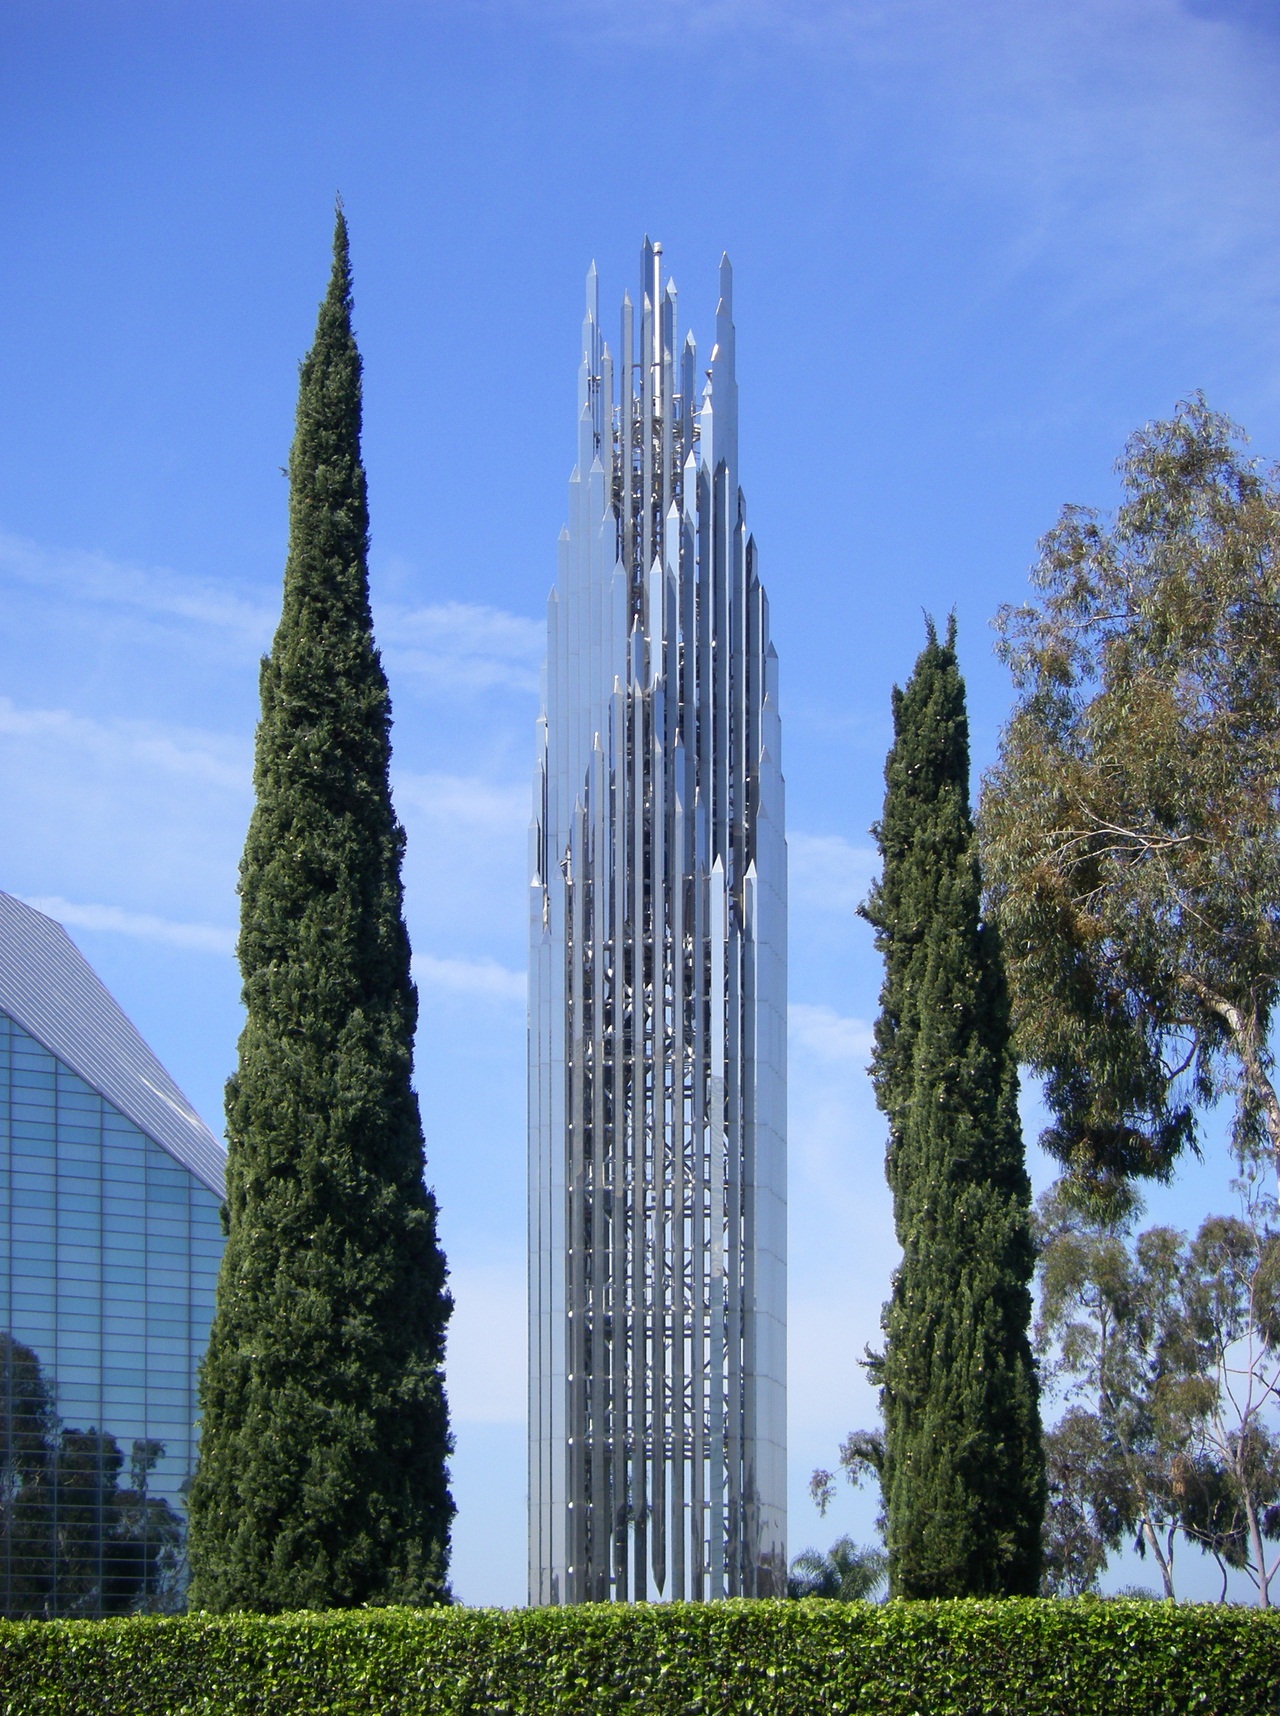 Spire of the Crystal Cathedral, Garden Grove (Anaheim/Los Angeles). (C) 2009 [http://commons.wikimedia.org/wiki/User:Wattewyl Wikimedia user 